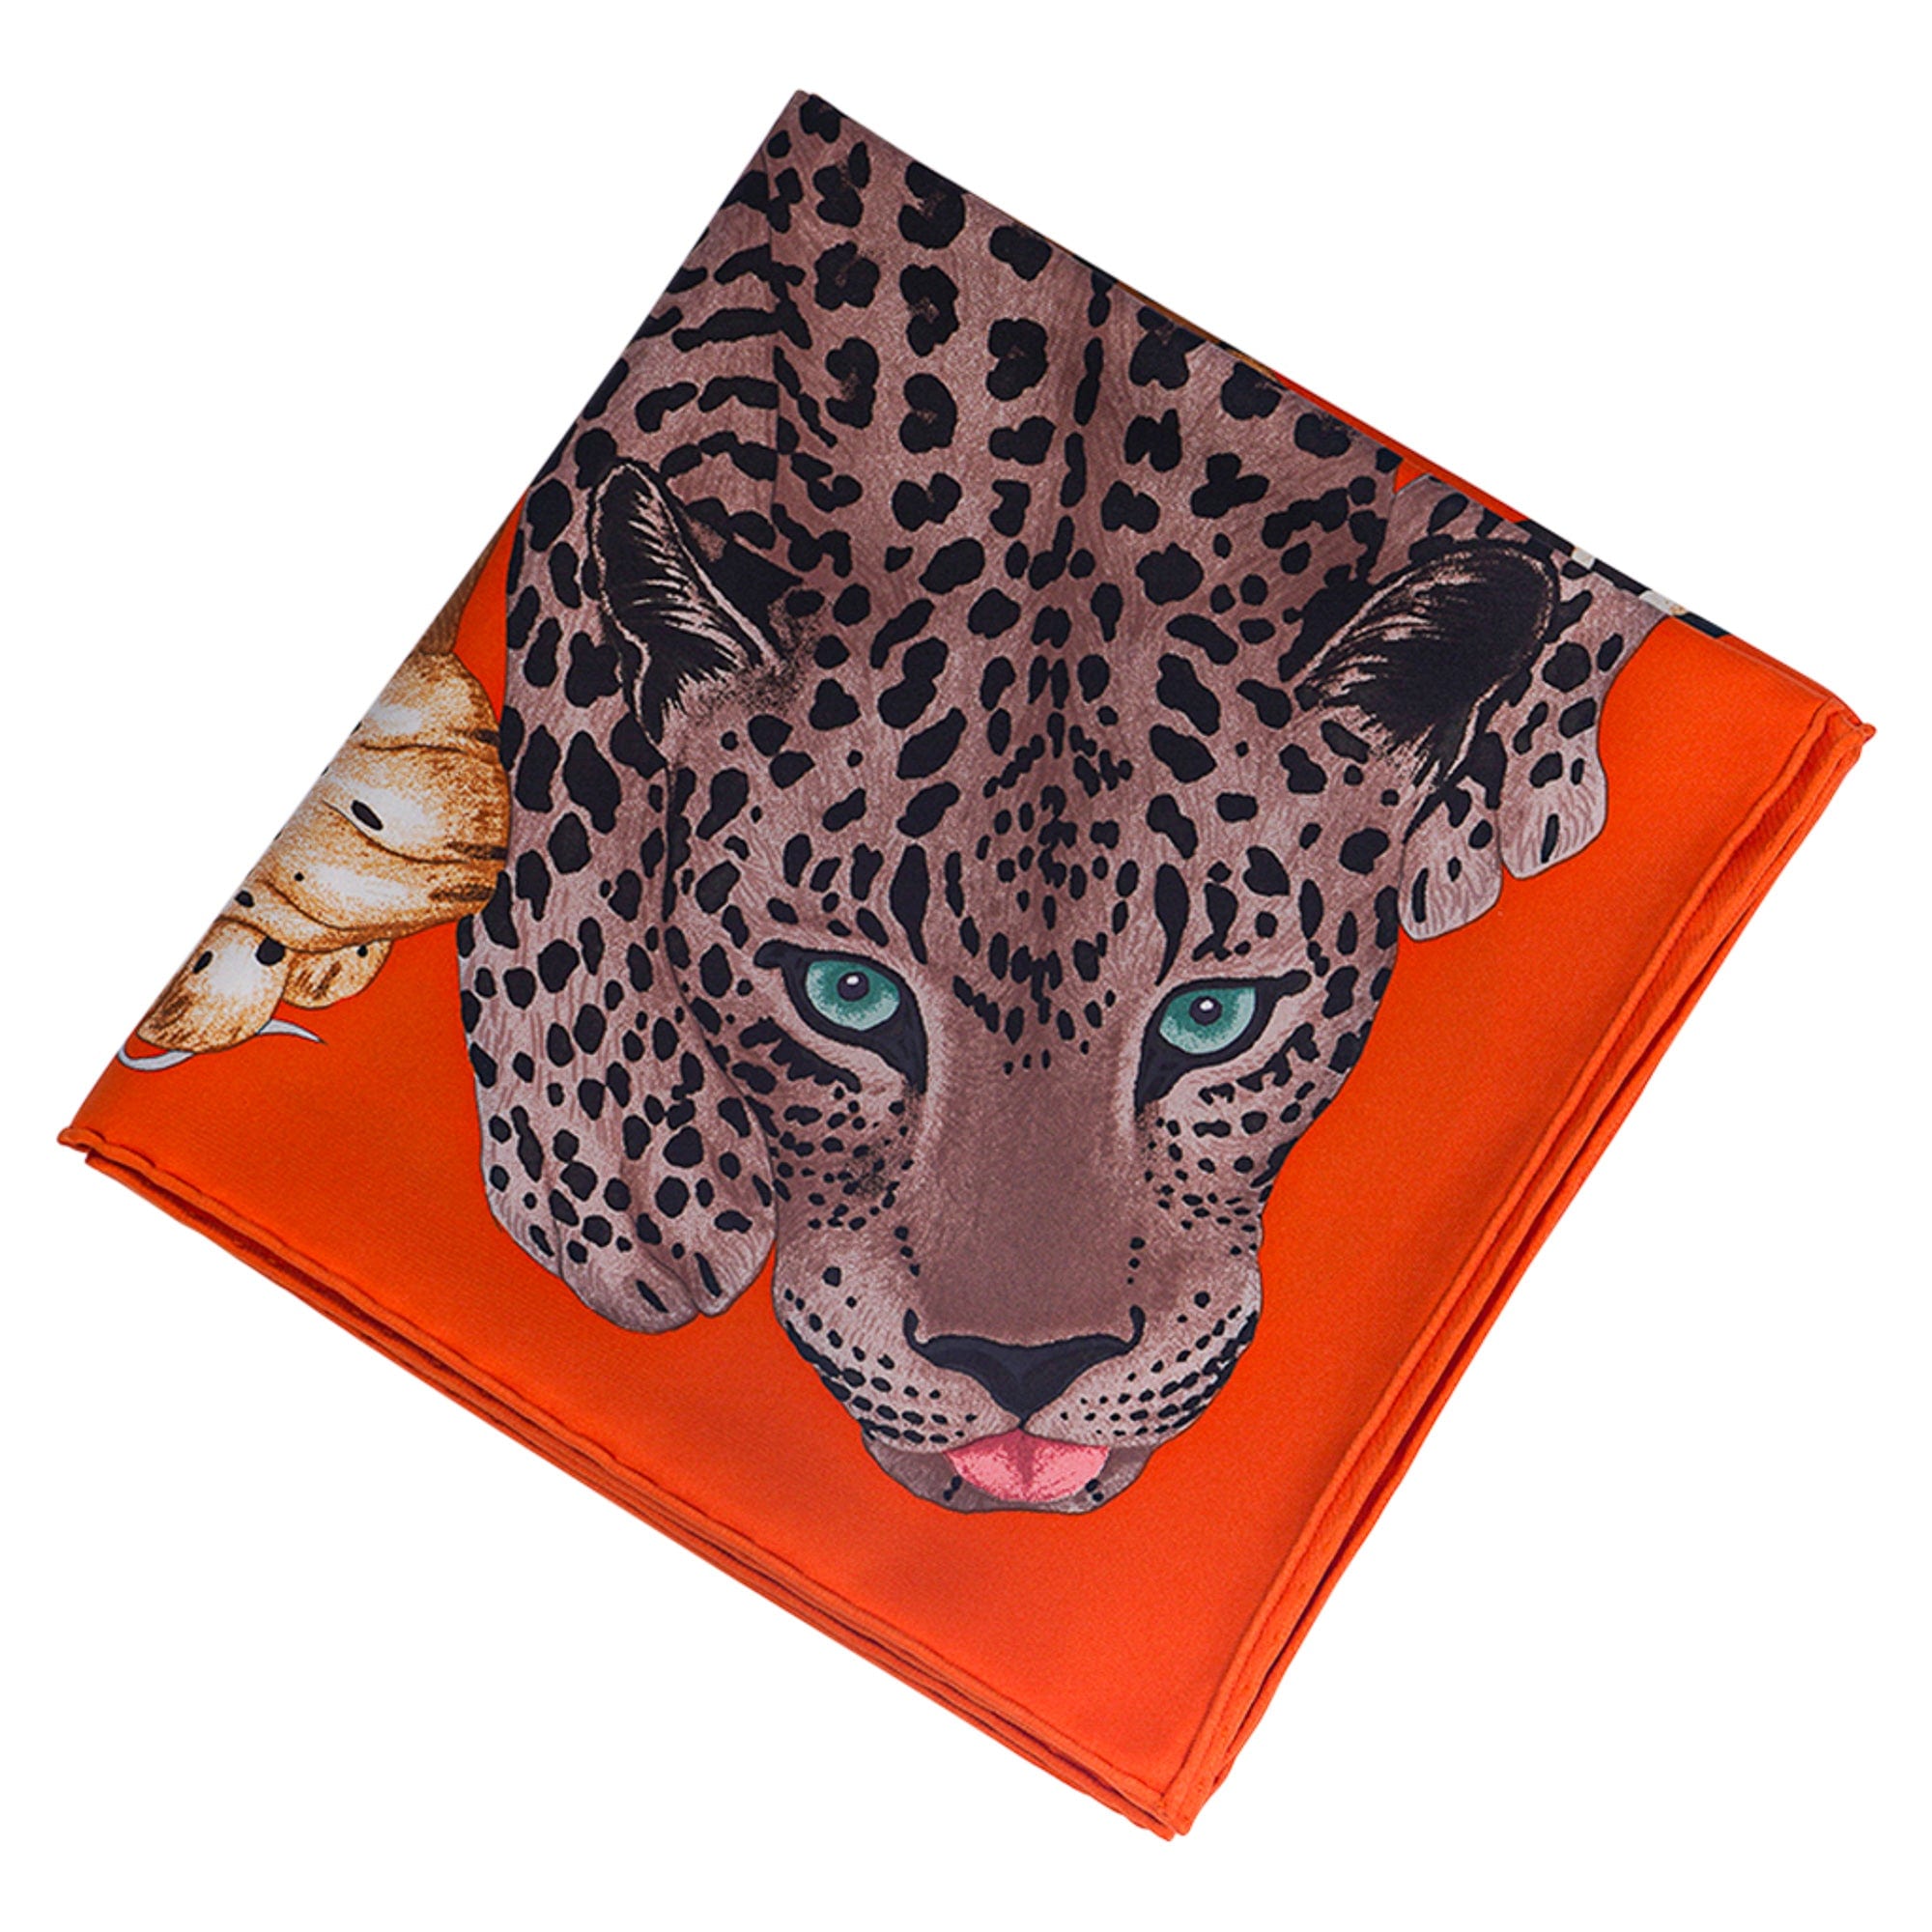 Swipe to see eight available 90cm silk Hermès scarves from our